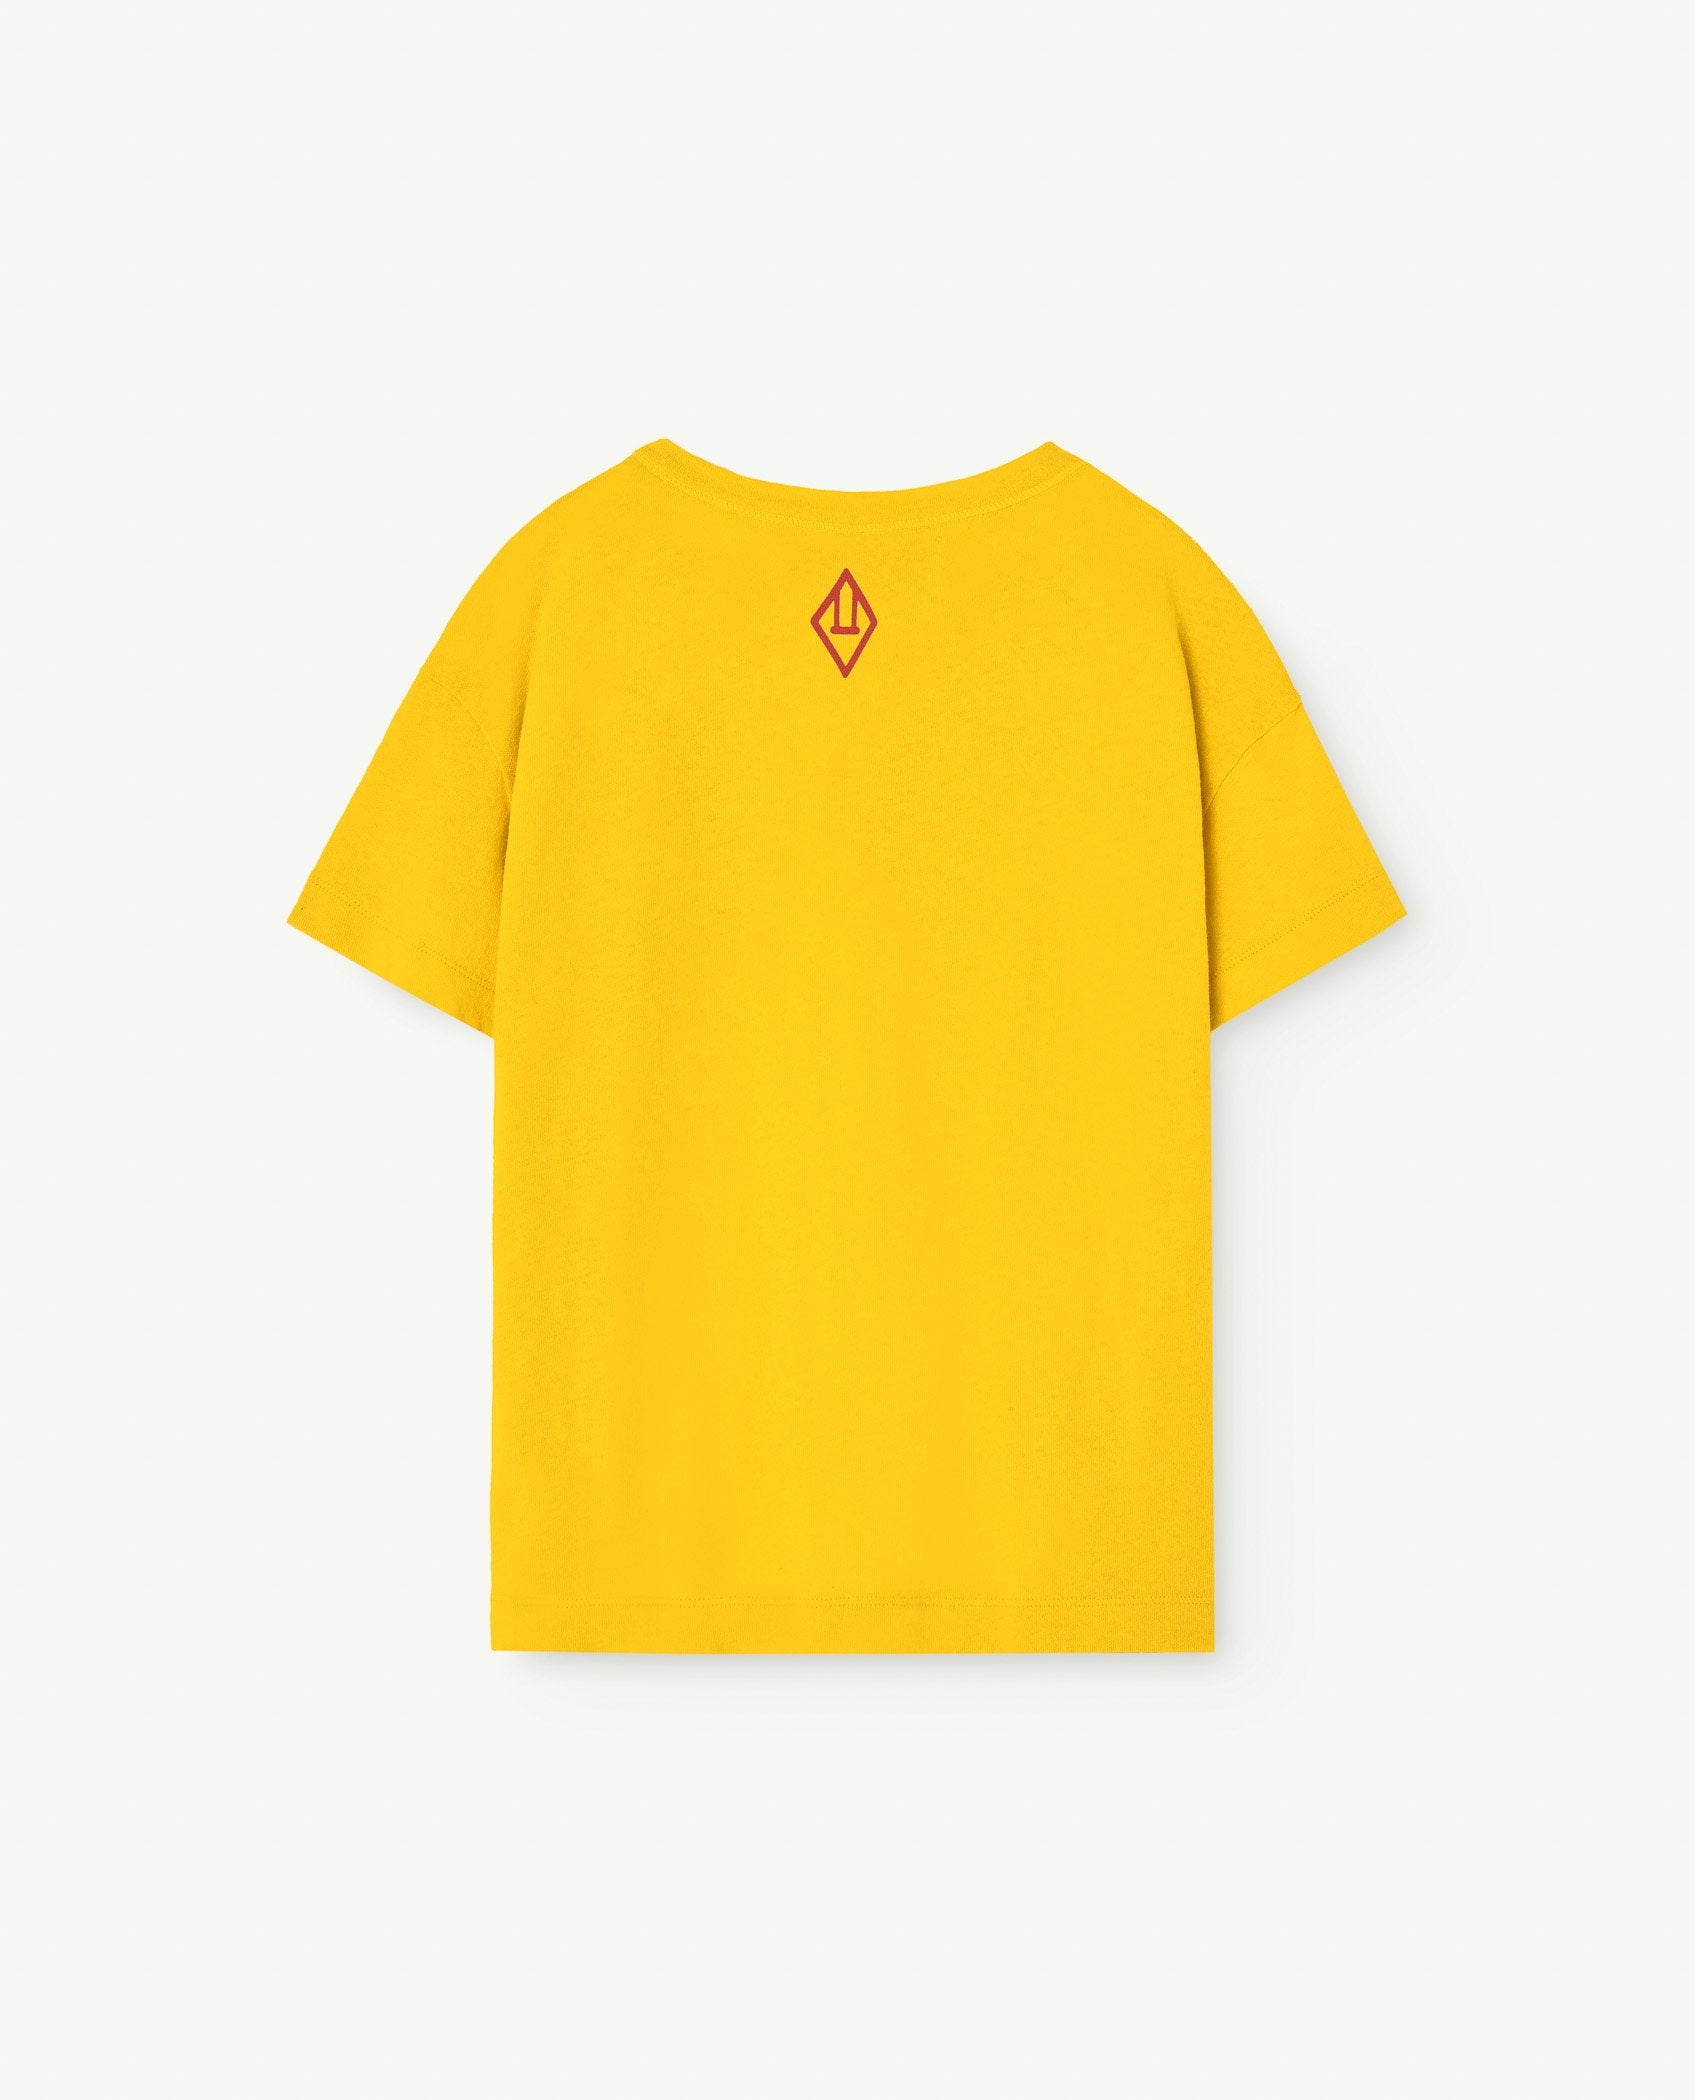 Yellow Orion Kids T-Shirt PRODUCT BACK